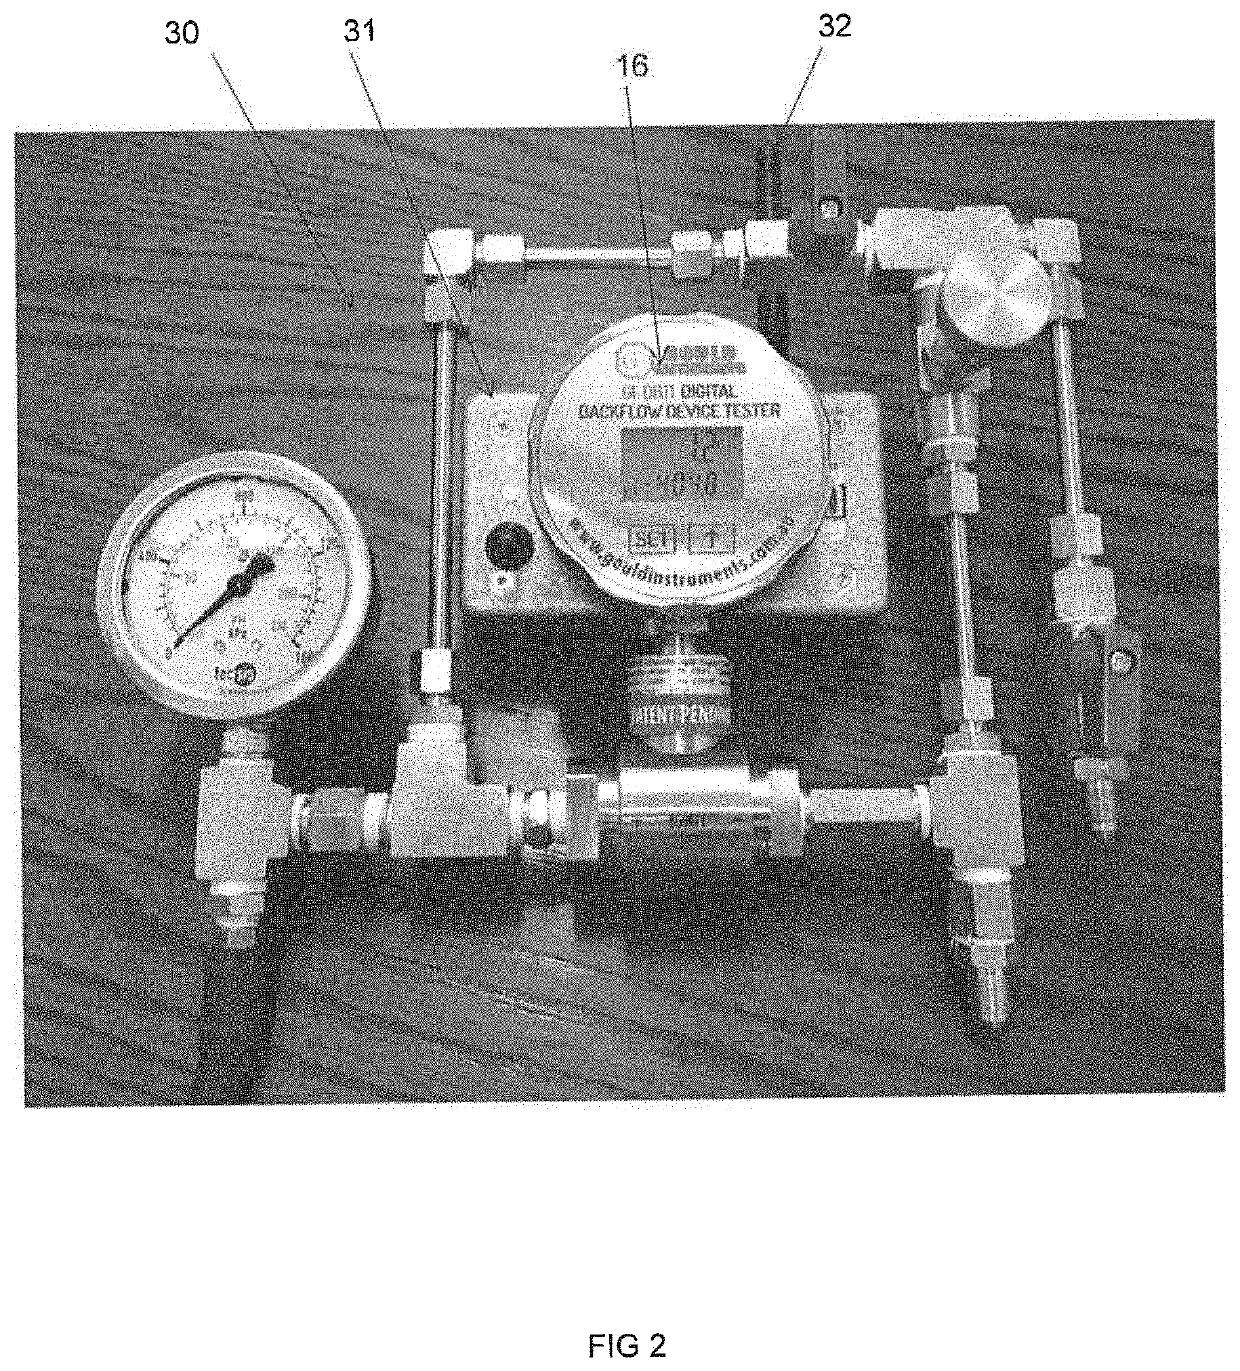 A testing device for backflow prevention devices